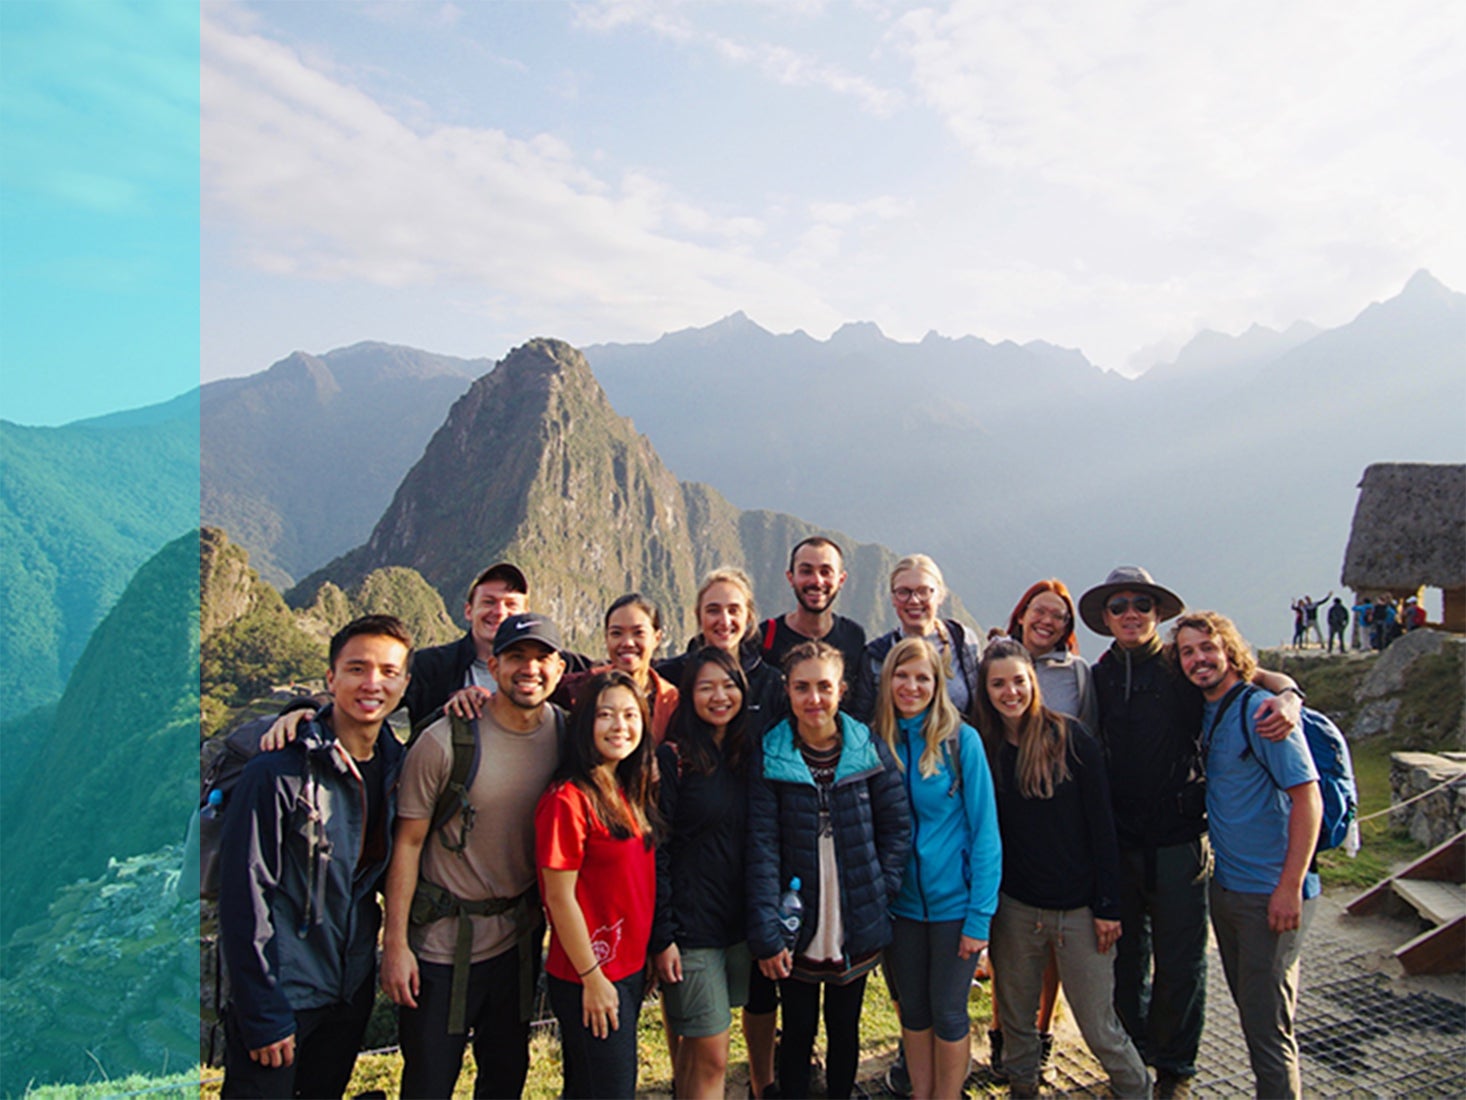 A group of study abroad students pose in front of a mountainous backdrop.